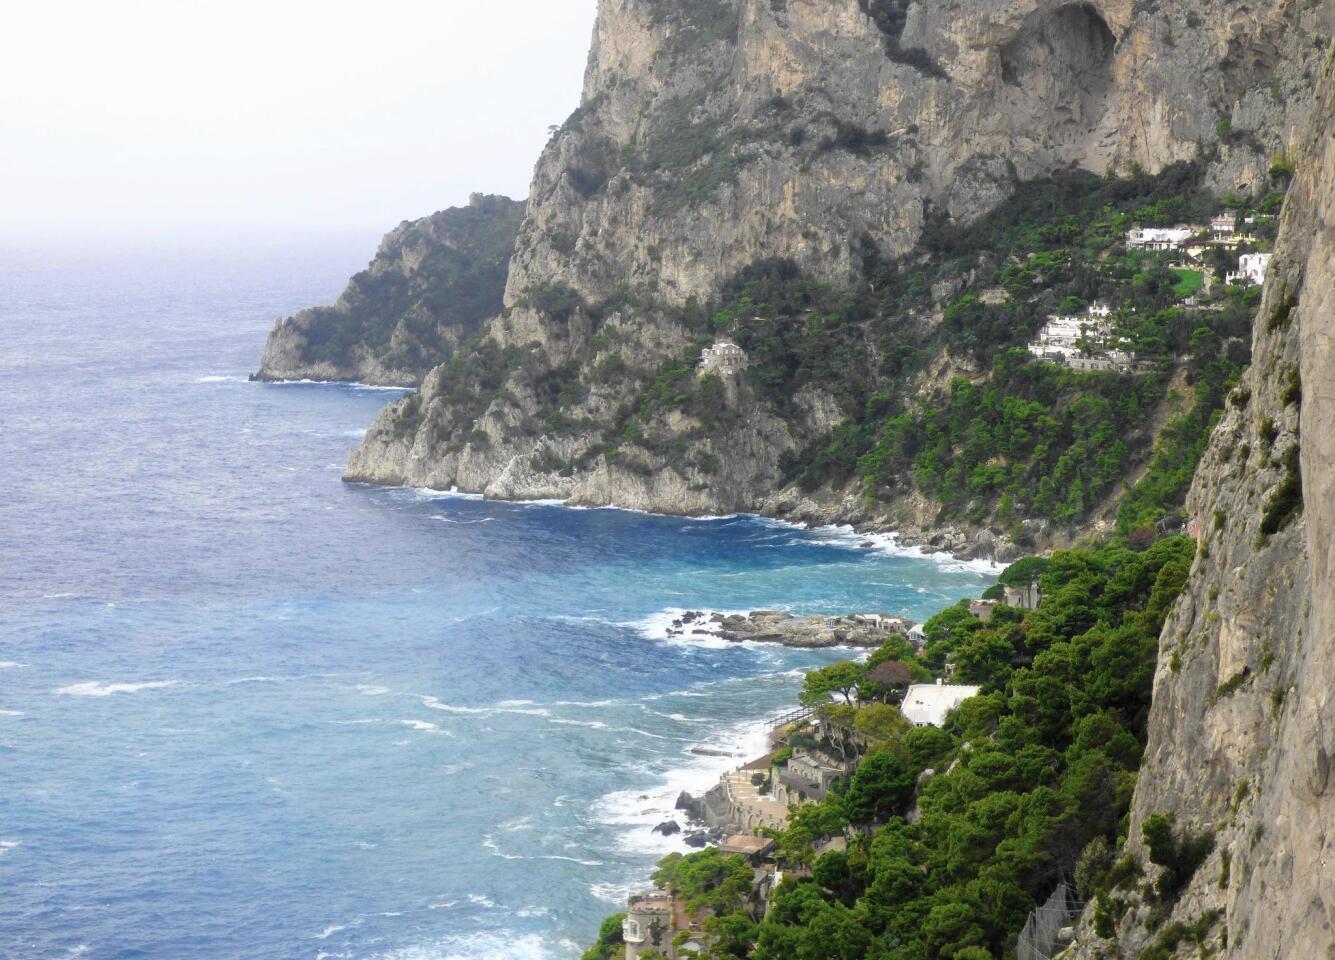 A view from the top of the island of Capri.